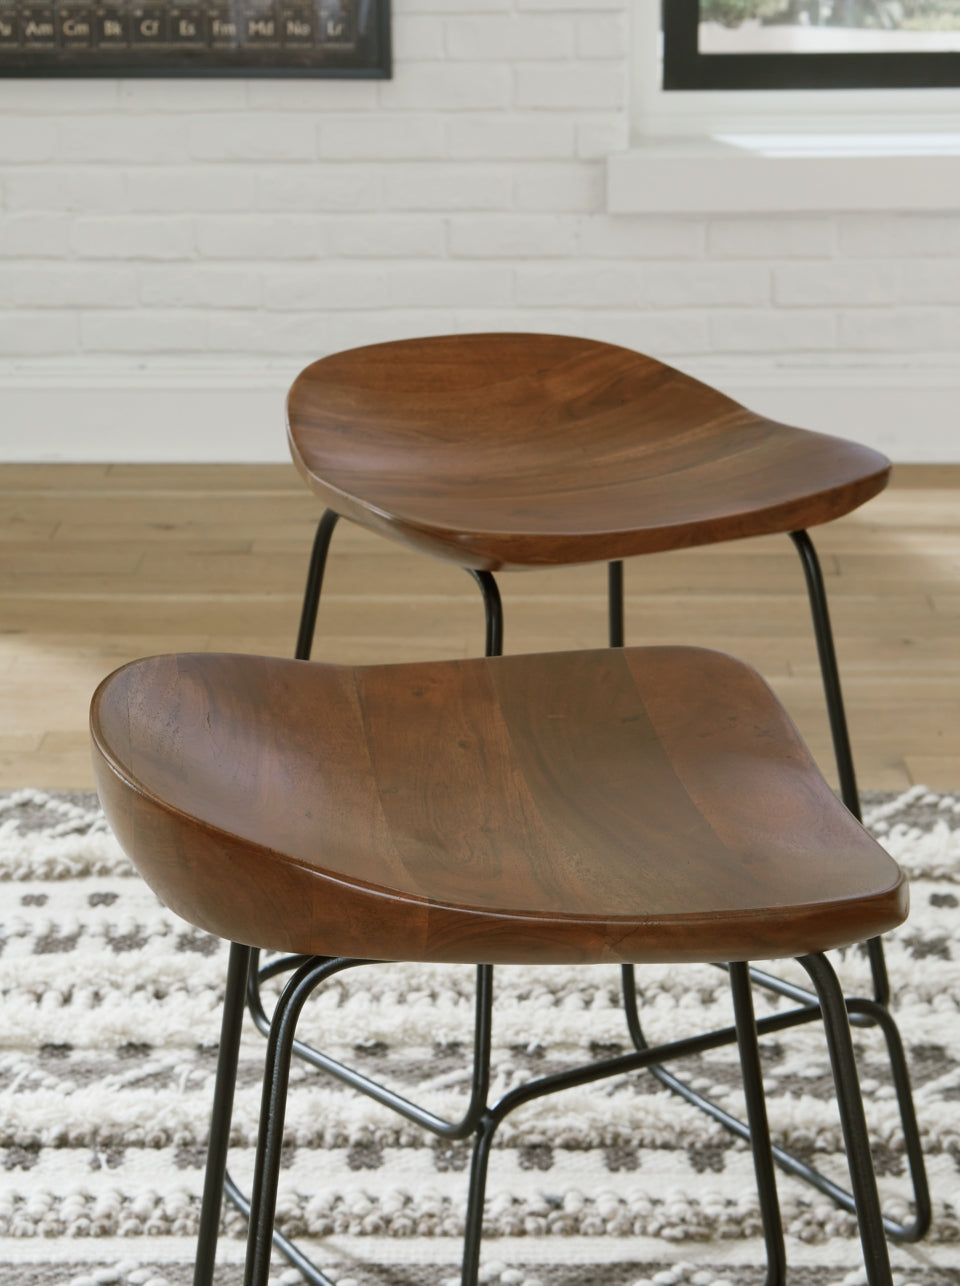 Wilinruck Counter Height Stool - furniture place usa